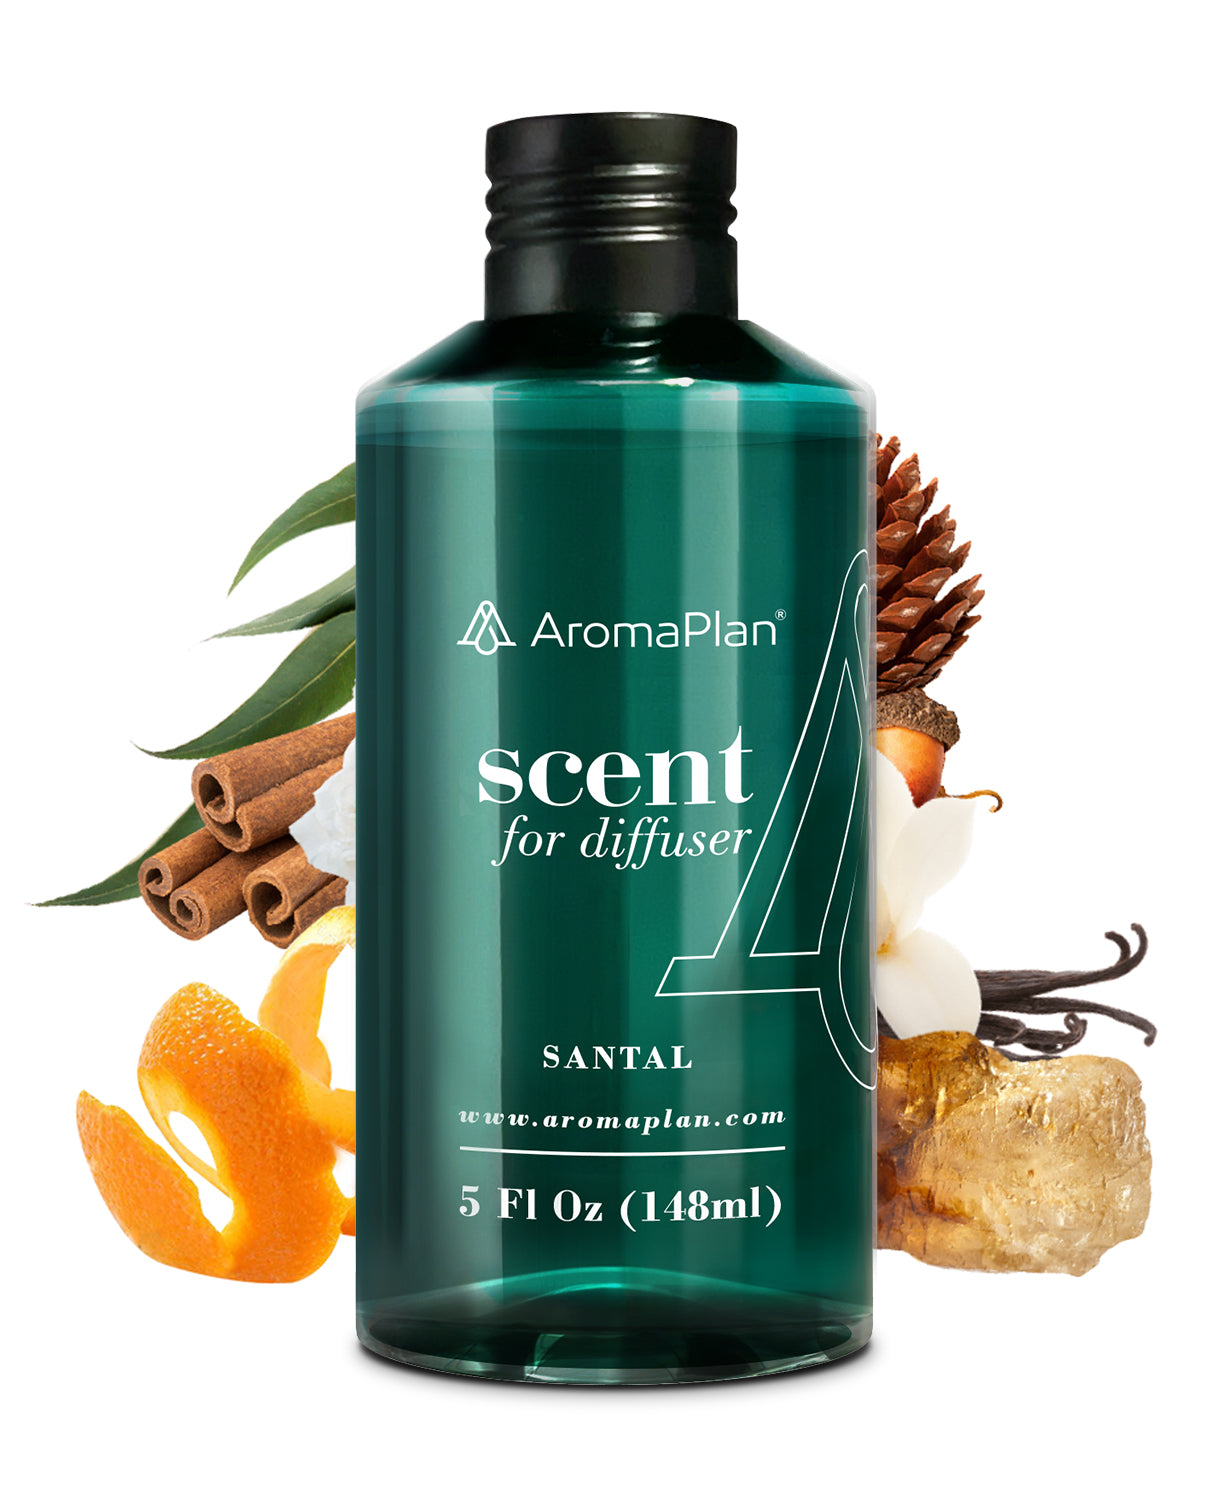 AromaPlan Hotel Scents Santal 5 fl oz, Hotel Collection - Diffuser Oil Blends for Aromatherapy - USA Fragrance, 5 fl oz (148ml)